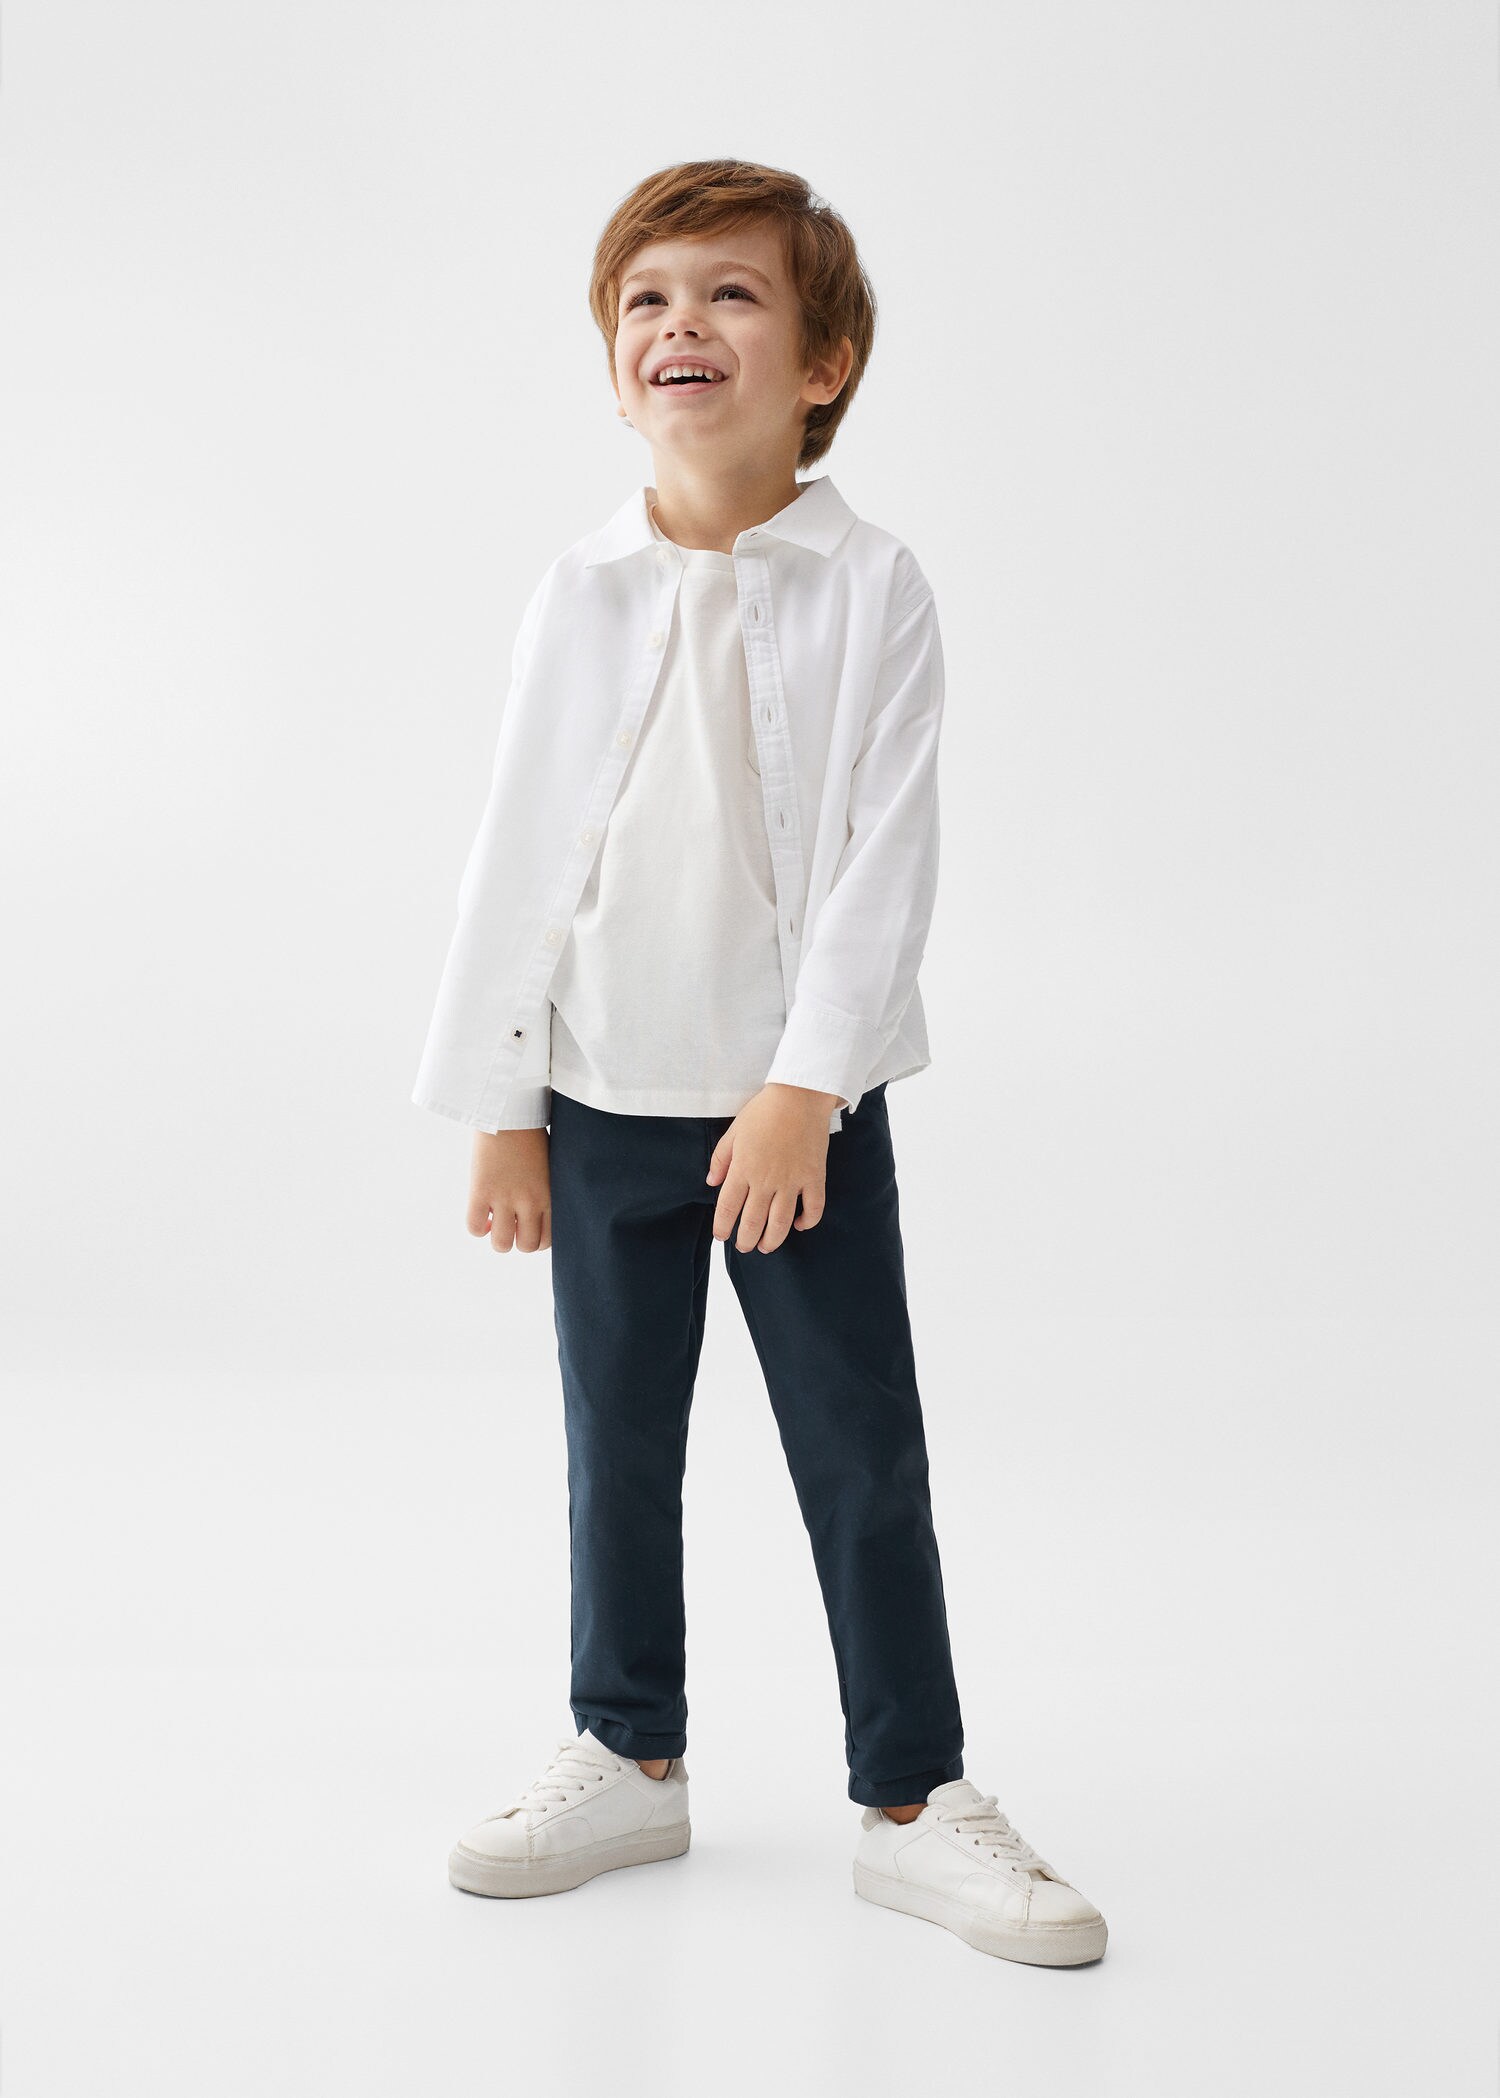 Buy HOP Baby Embroidered Blue Shirt, Waistcoat & Trousers Set from Westside